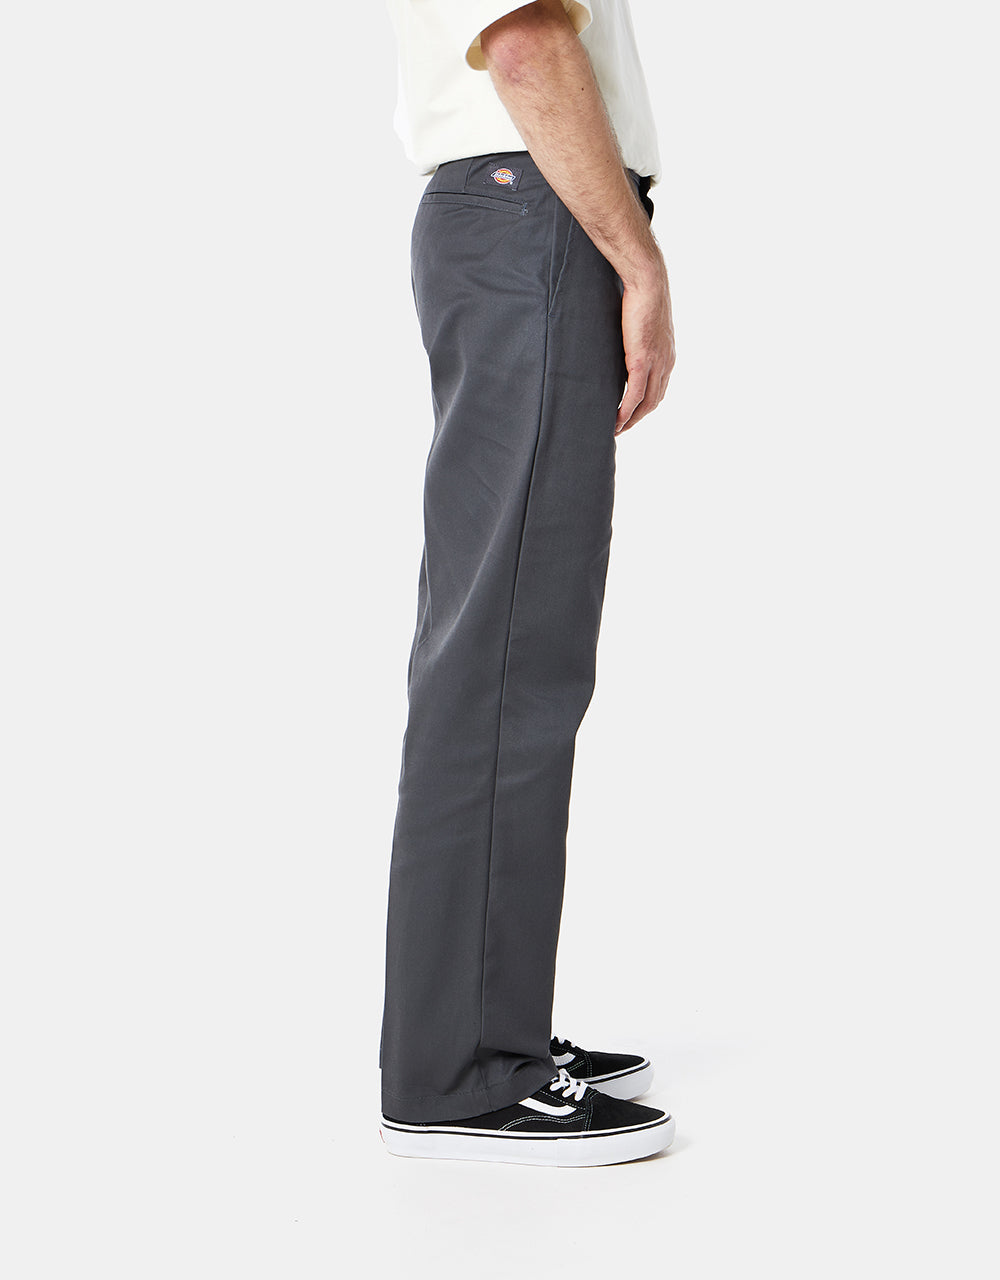 Dickies 874 Recycled Work Pant - Charcoal Grey